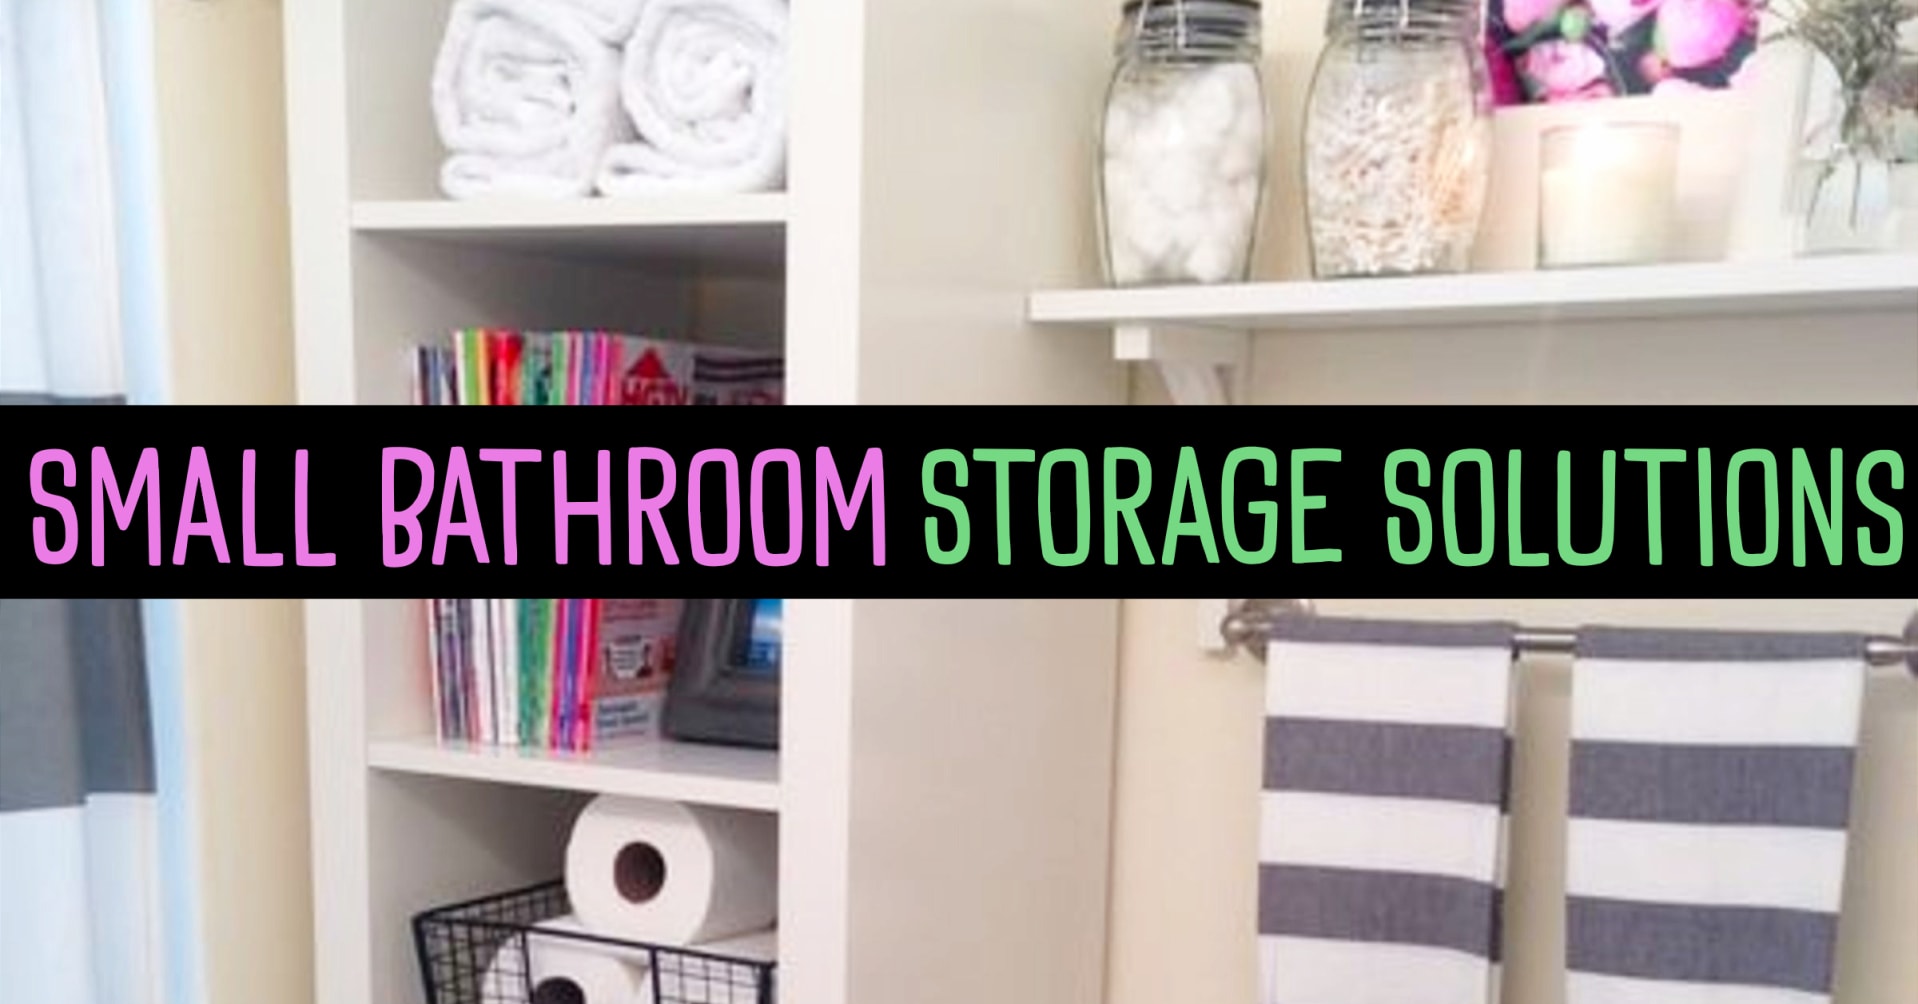 creative storage solutions for small bathrooms